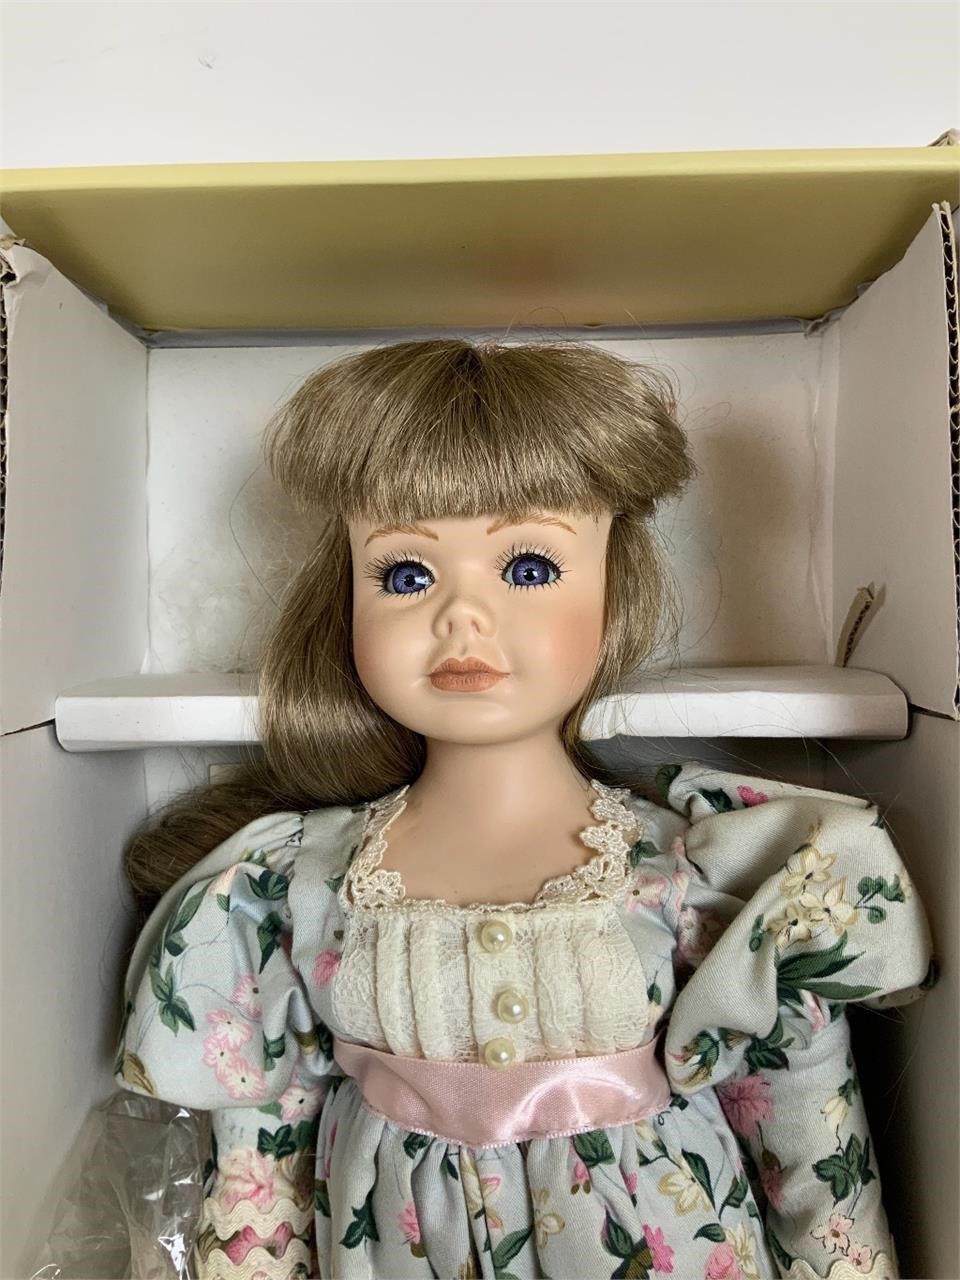 Online Only - Doll Estate Auction (2)- 6/18/21 - 6/27/21